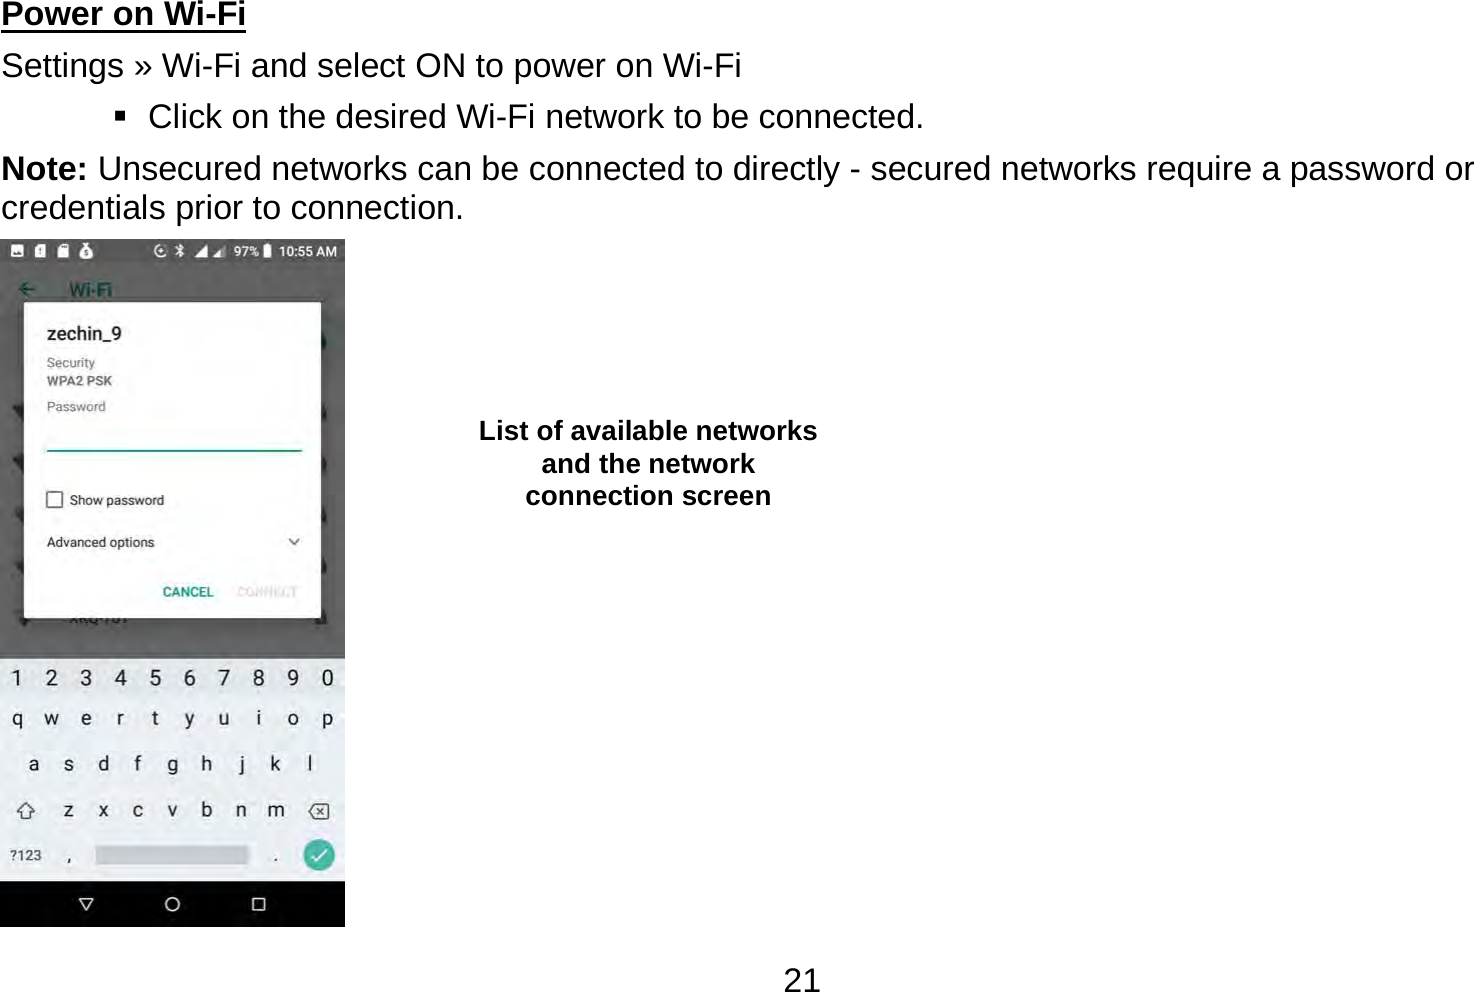   21Power on Wi-Fi                                                                                 Settings » Wi-Fi and select ON to power on Wi-Fi    Click on the desired Wi-Fi network to be connected.                 Note: Unsecured networks can be connected to directly - secured networks require a password or credentials prior to connection.  List of available networks and the network connection screen 